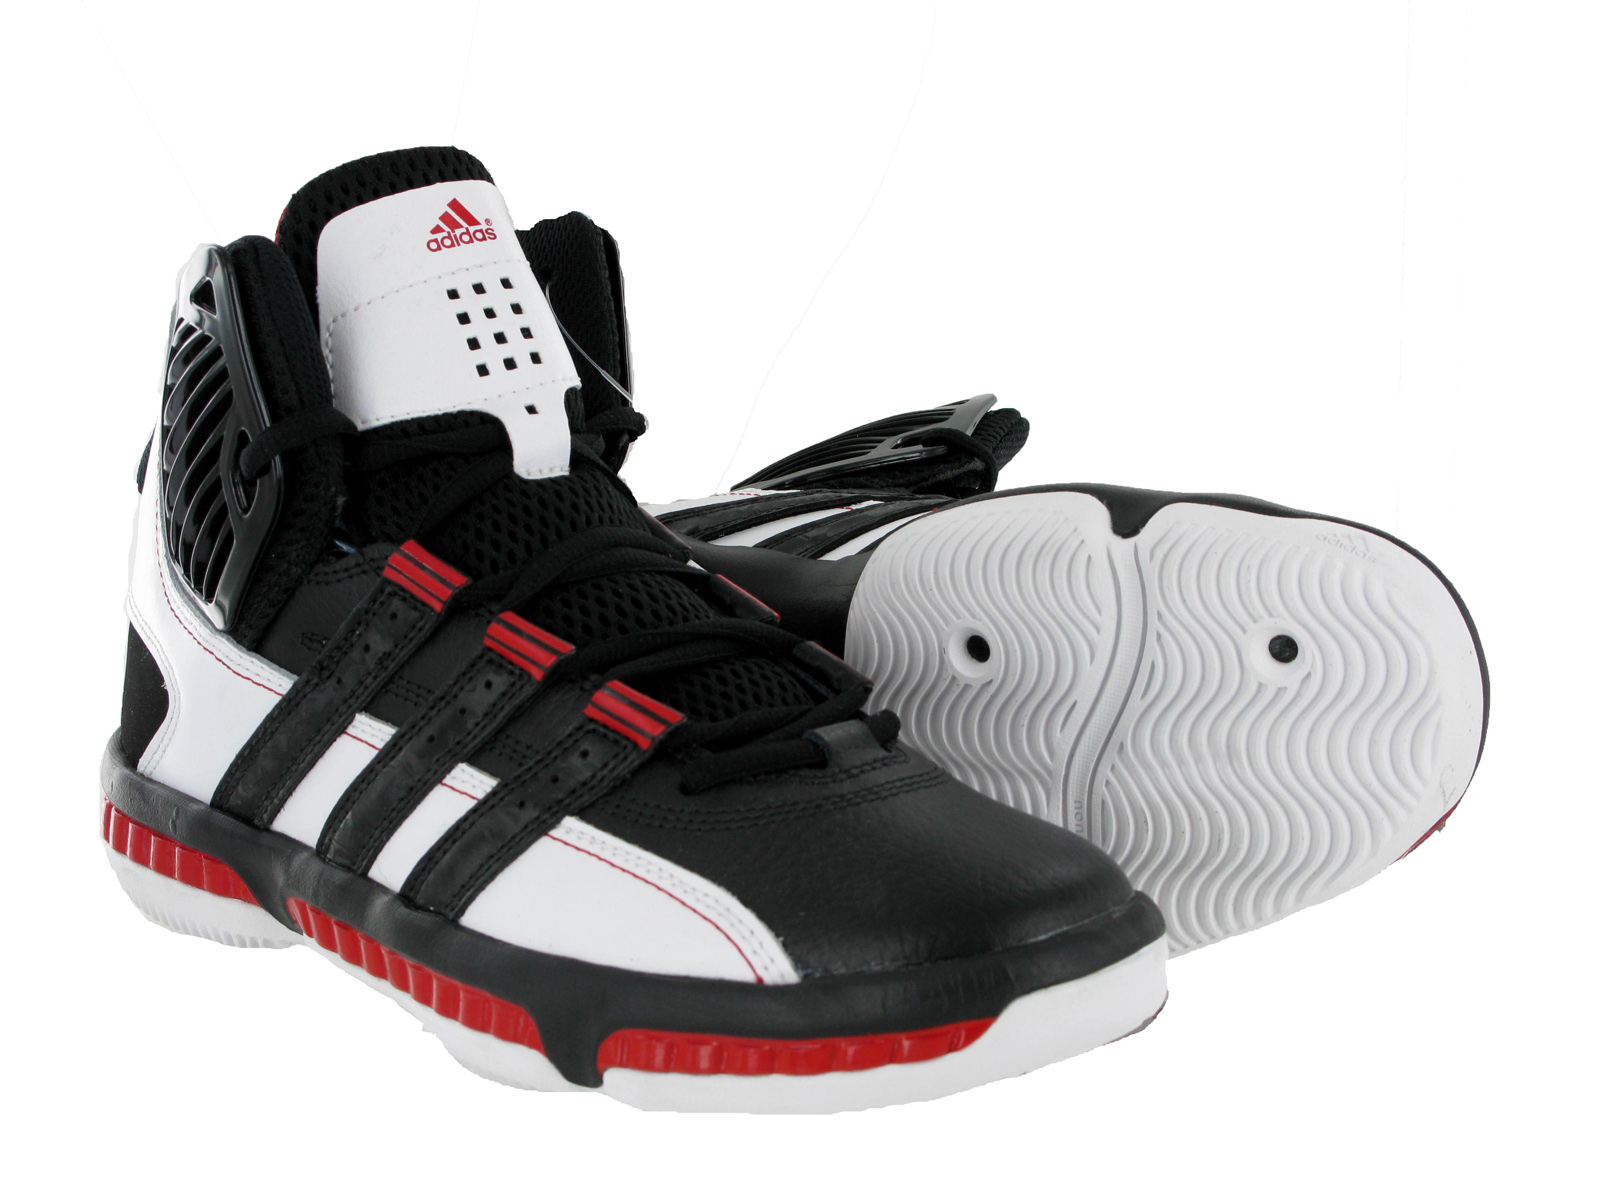 Adidas MisterFly in black white red color way